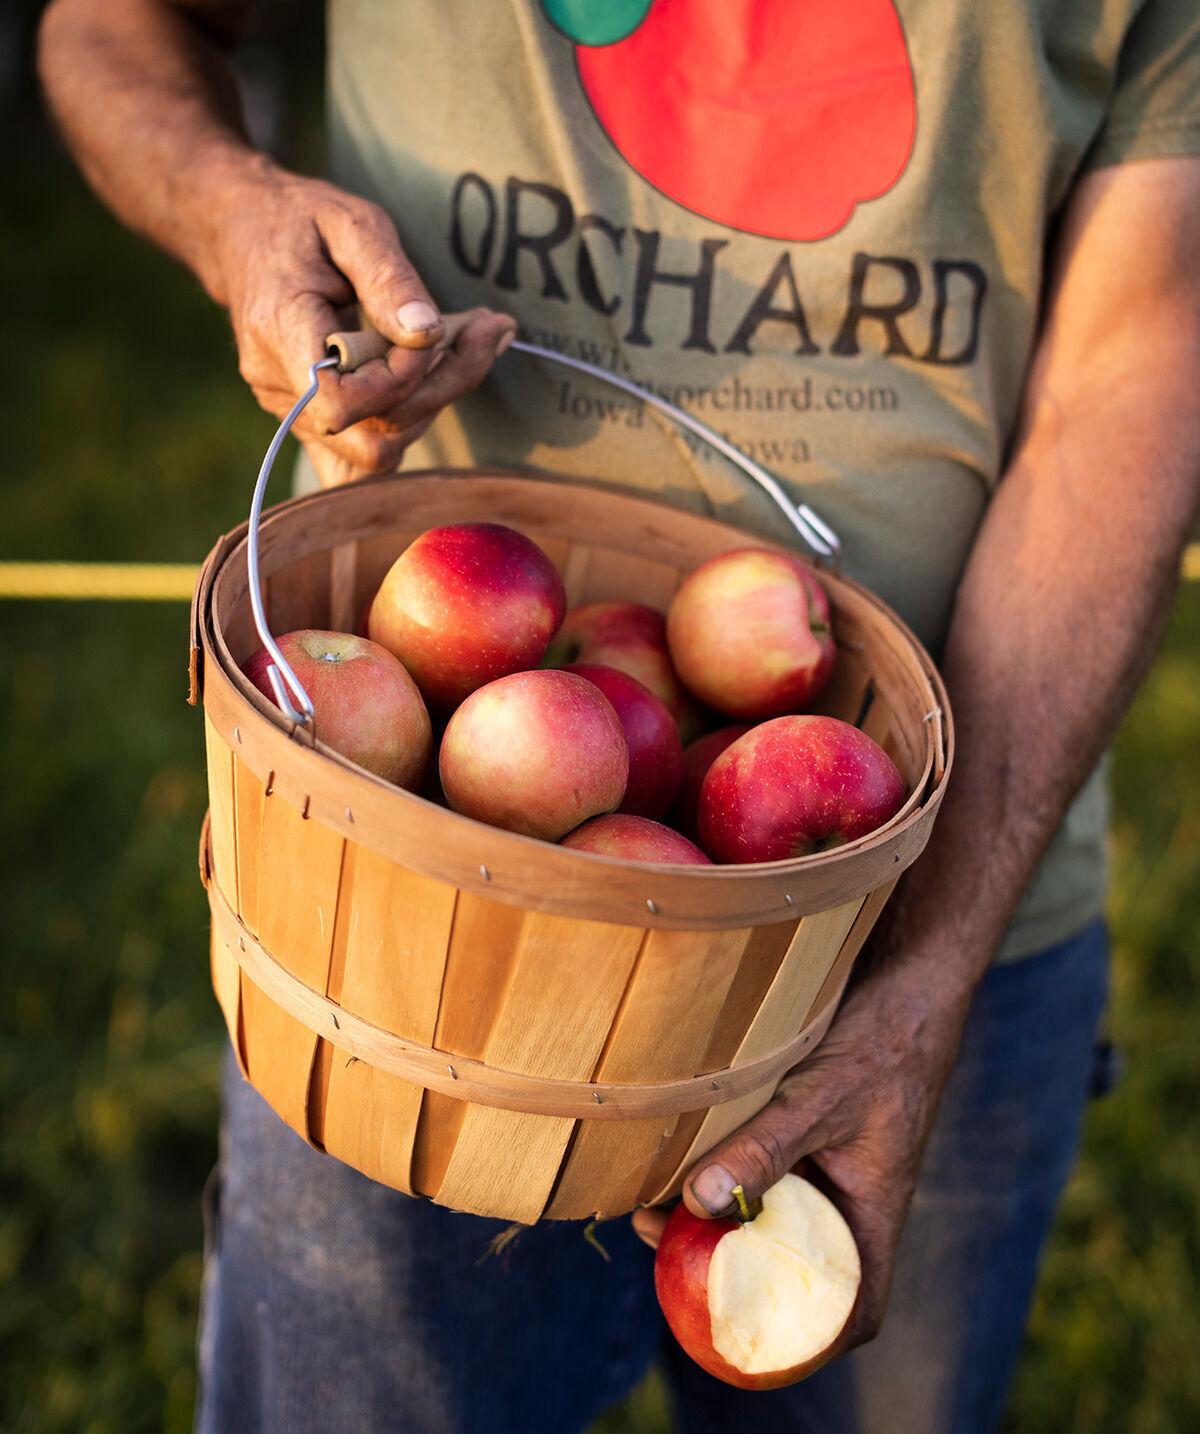 Wilson's Orchard basket of apples